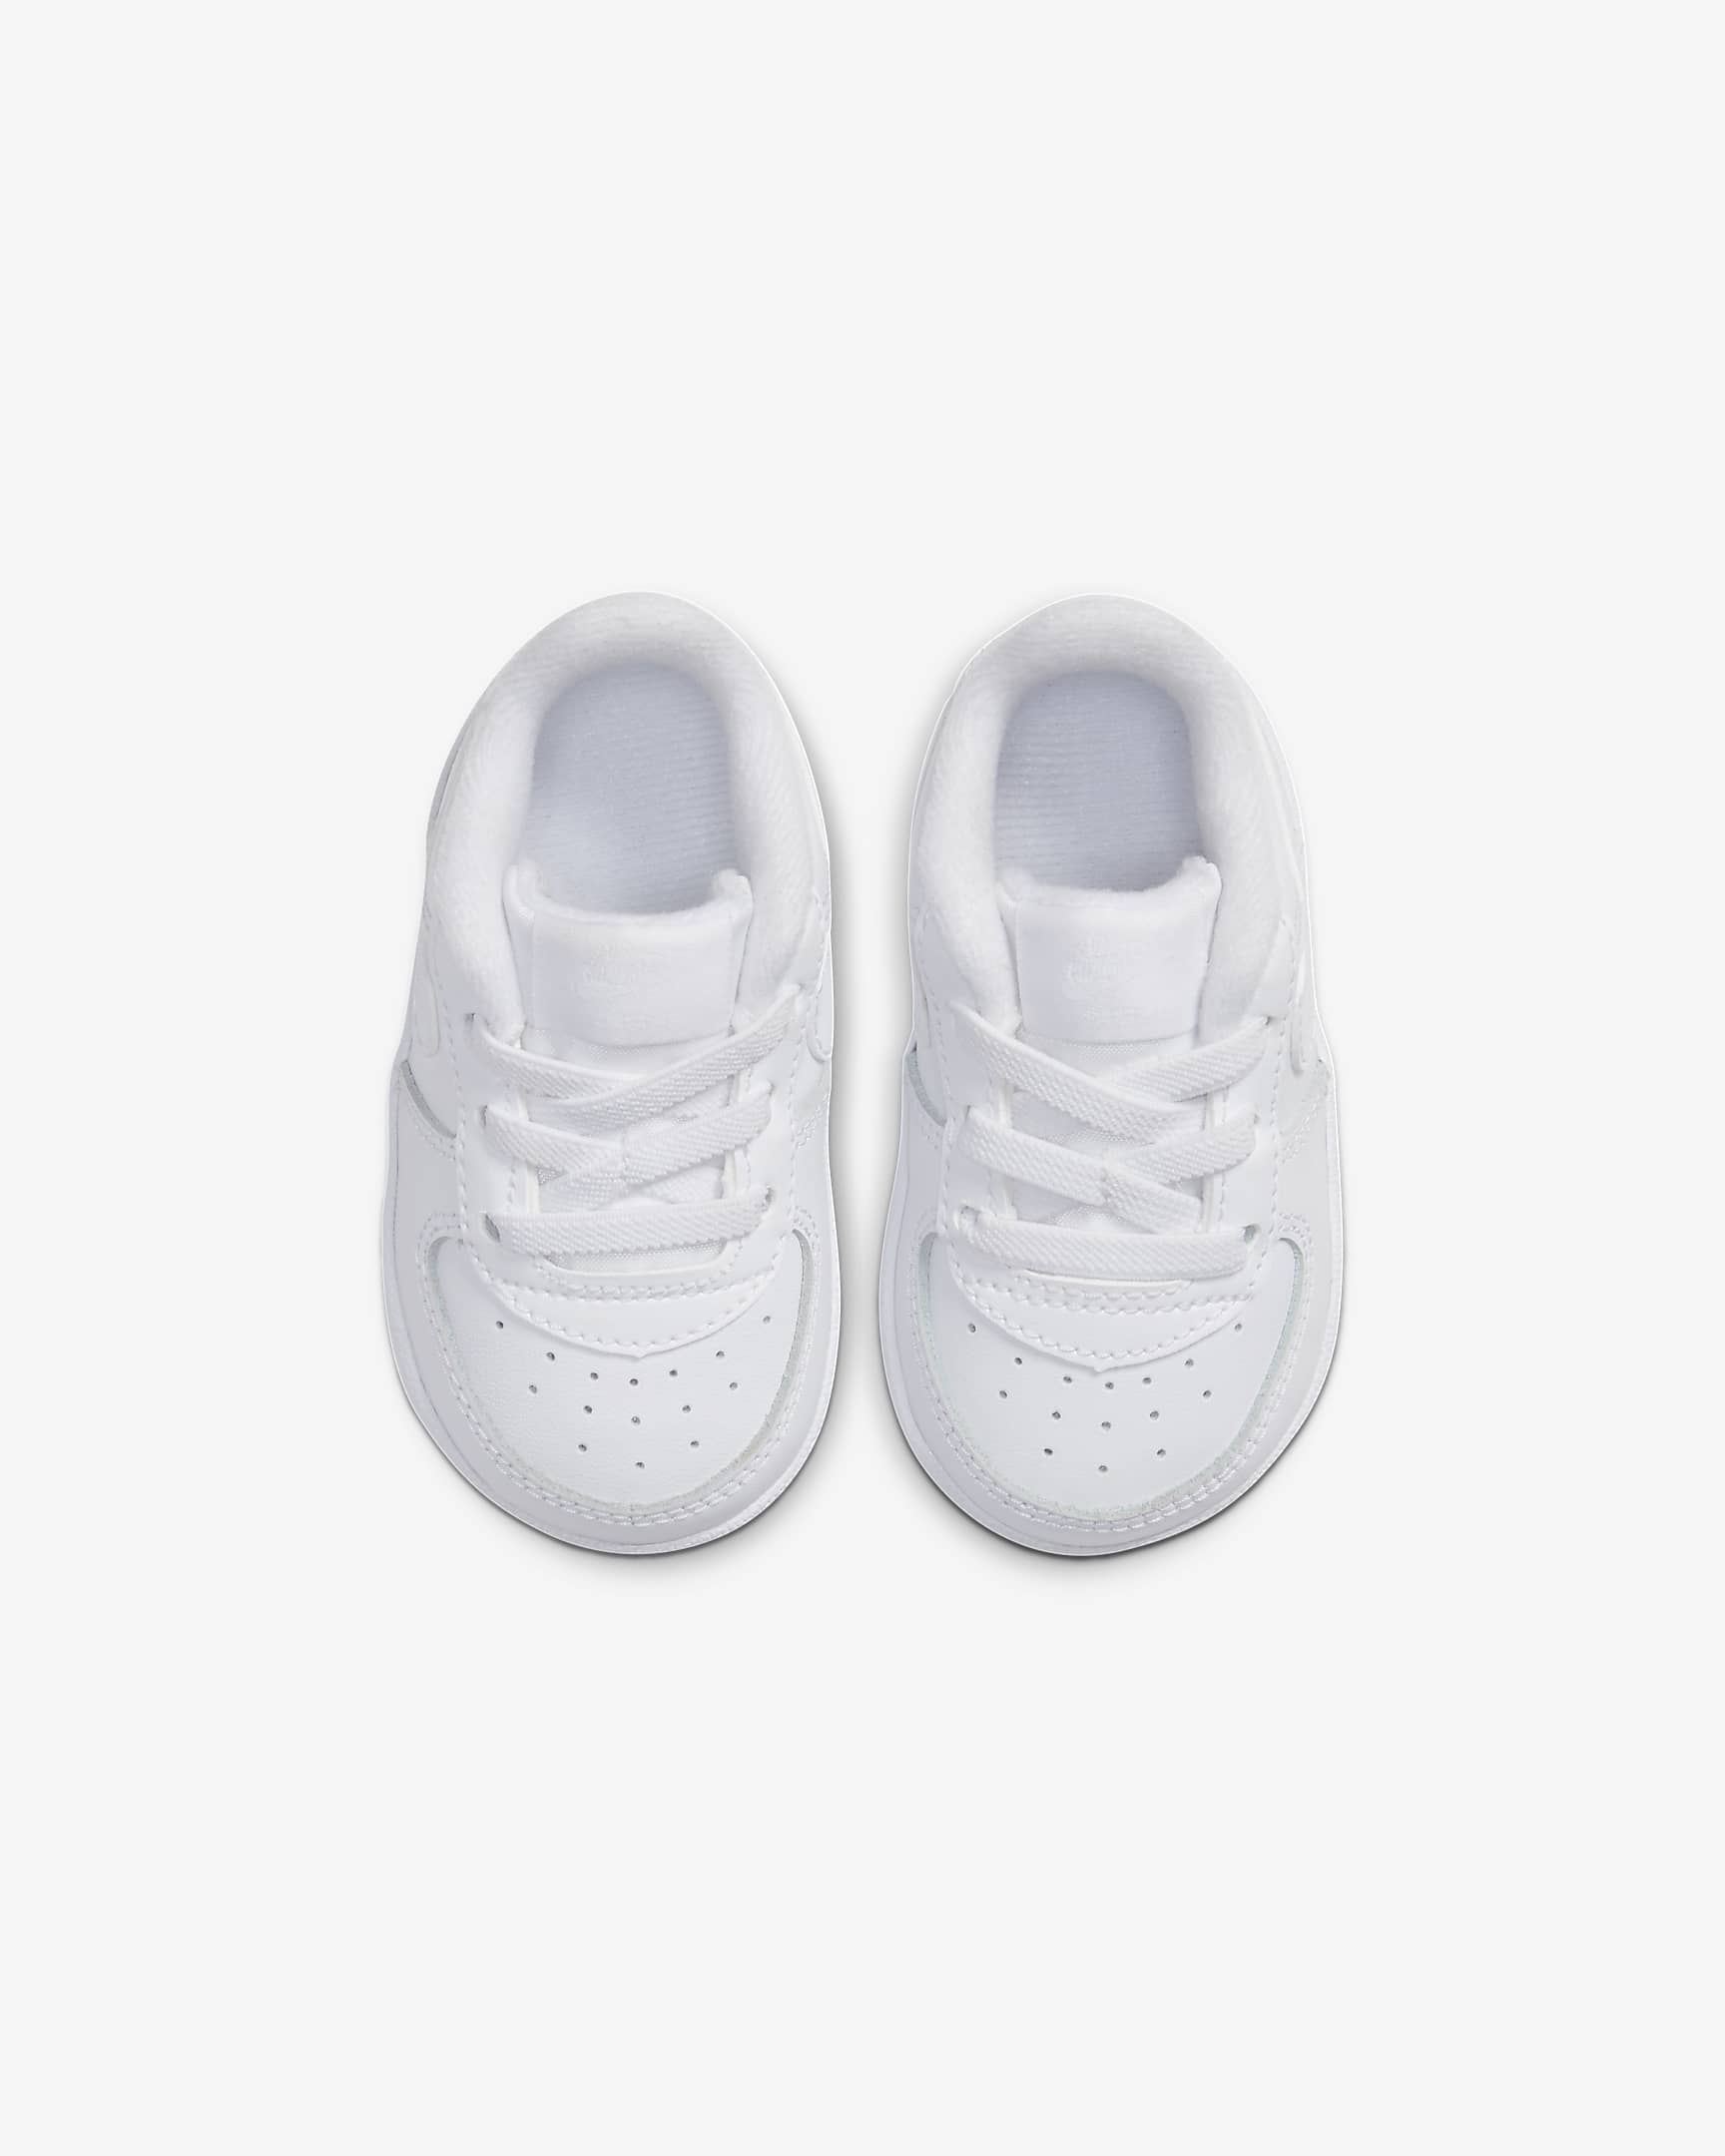 Nike Force 1 Cot Baby Bootie. Nike HR